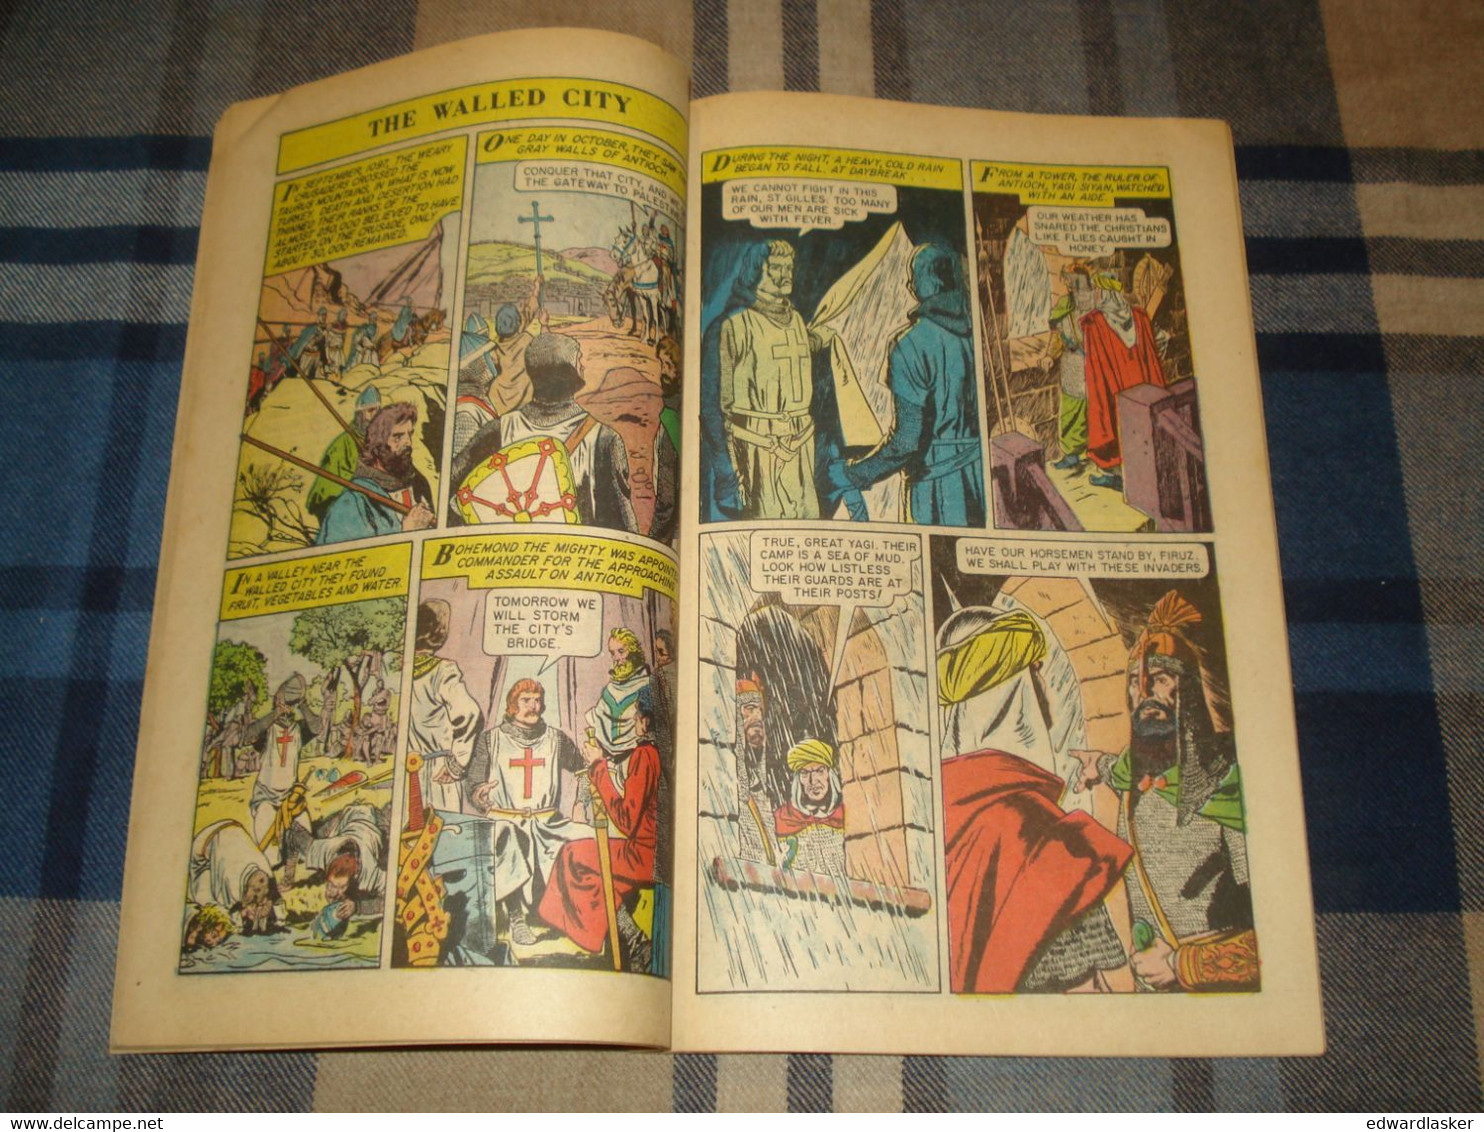 THE WORLD AROUND US N°16 : The Crusades (comics VO) - Déc. 1959 - Classics Illustrated - Bon état - Other Publishers